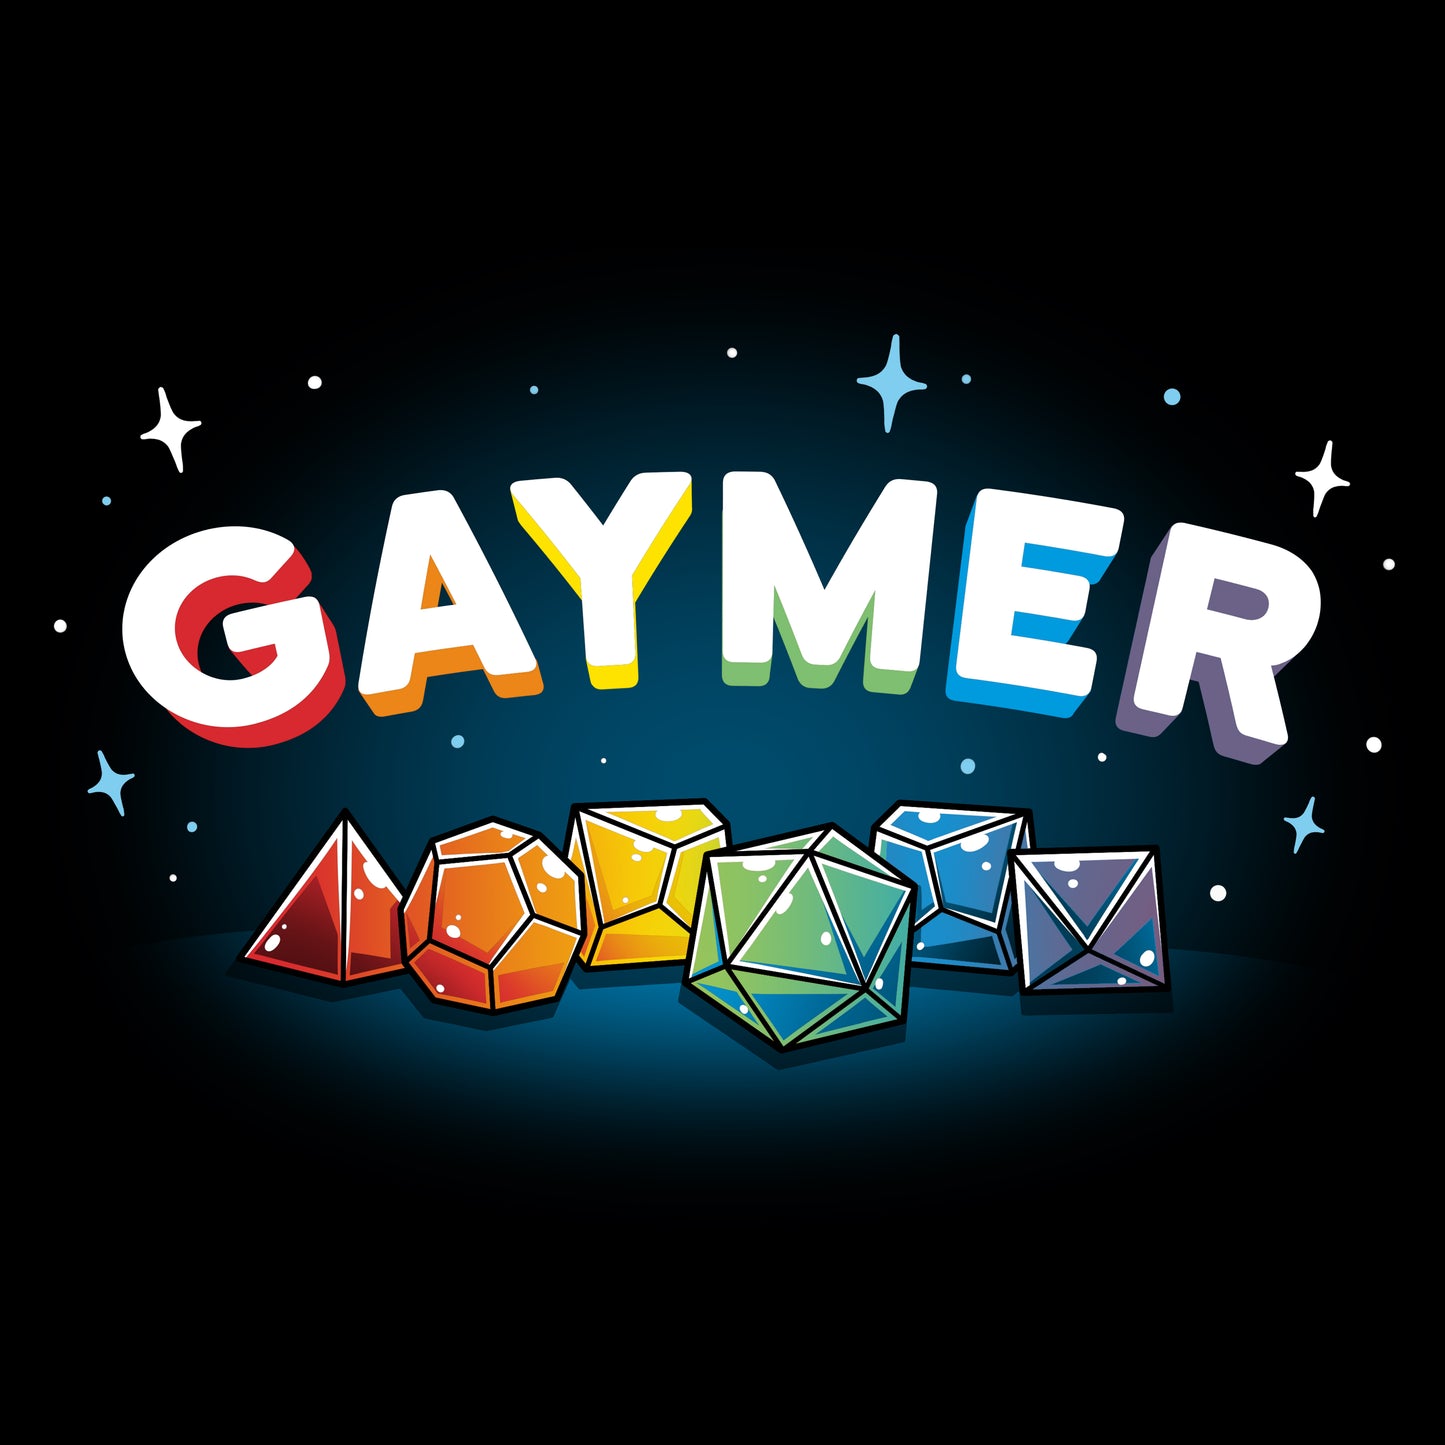 TeeTurtle original Gaymer (Tabletop Gaming) logo featuring colorful dice on a dark background.